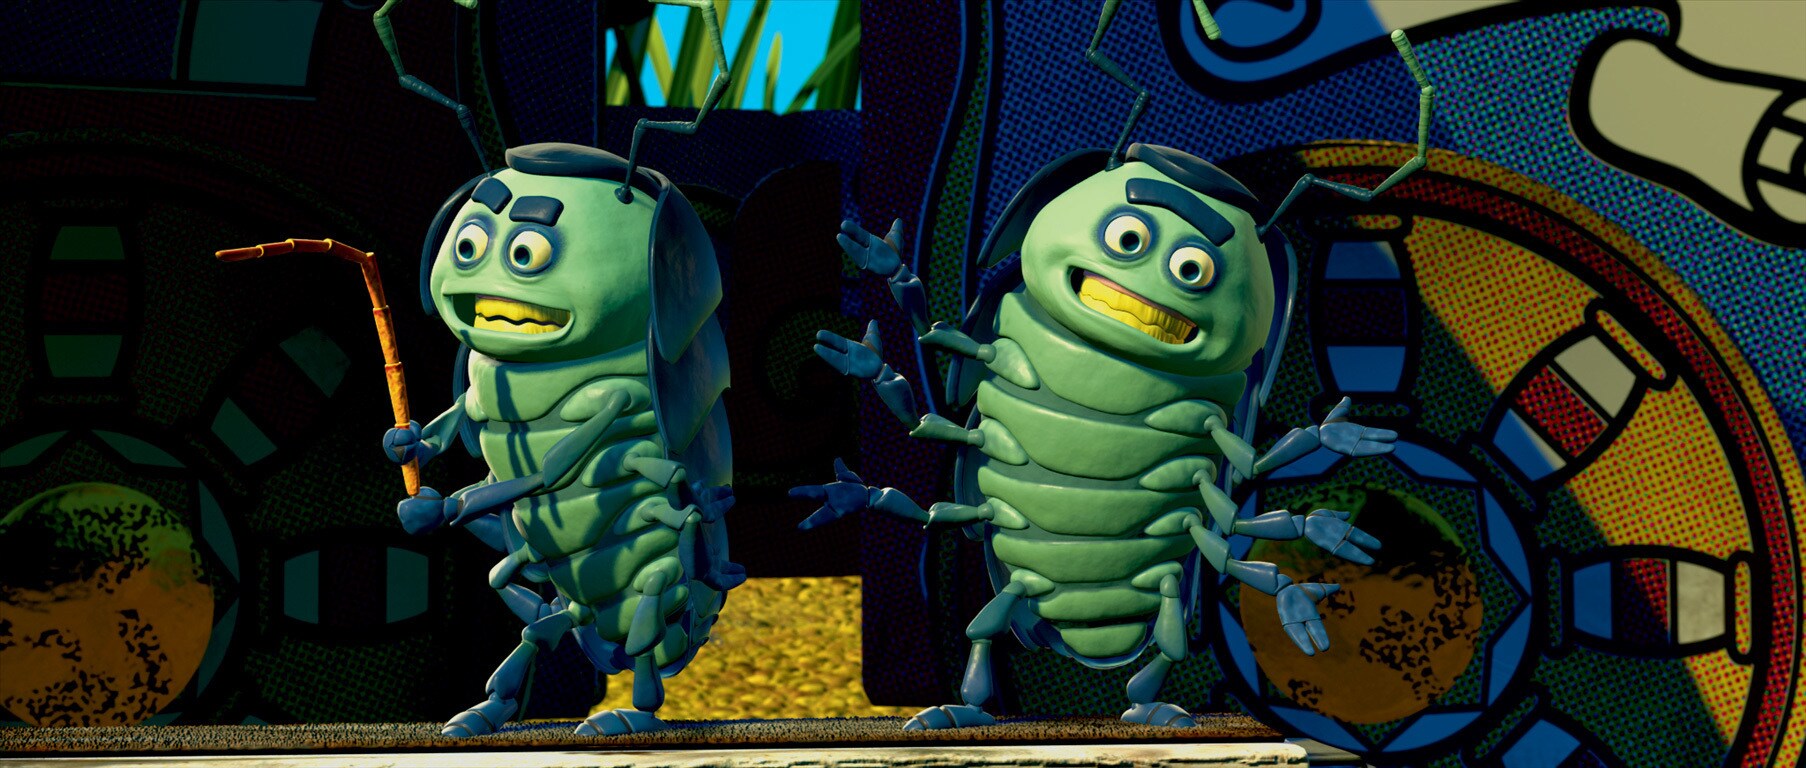 Tuck and Roll from "A Bug's Life"